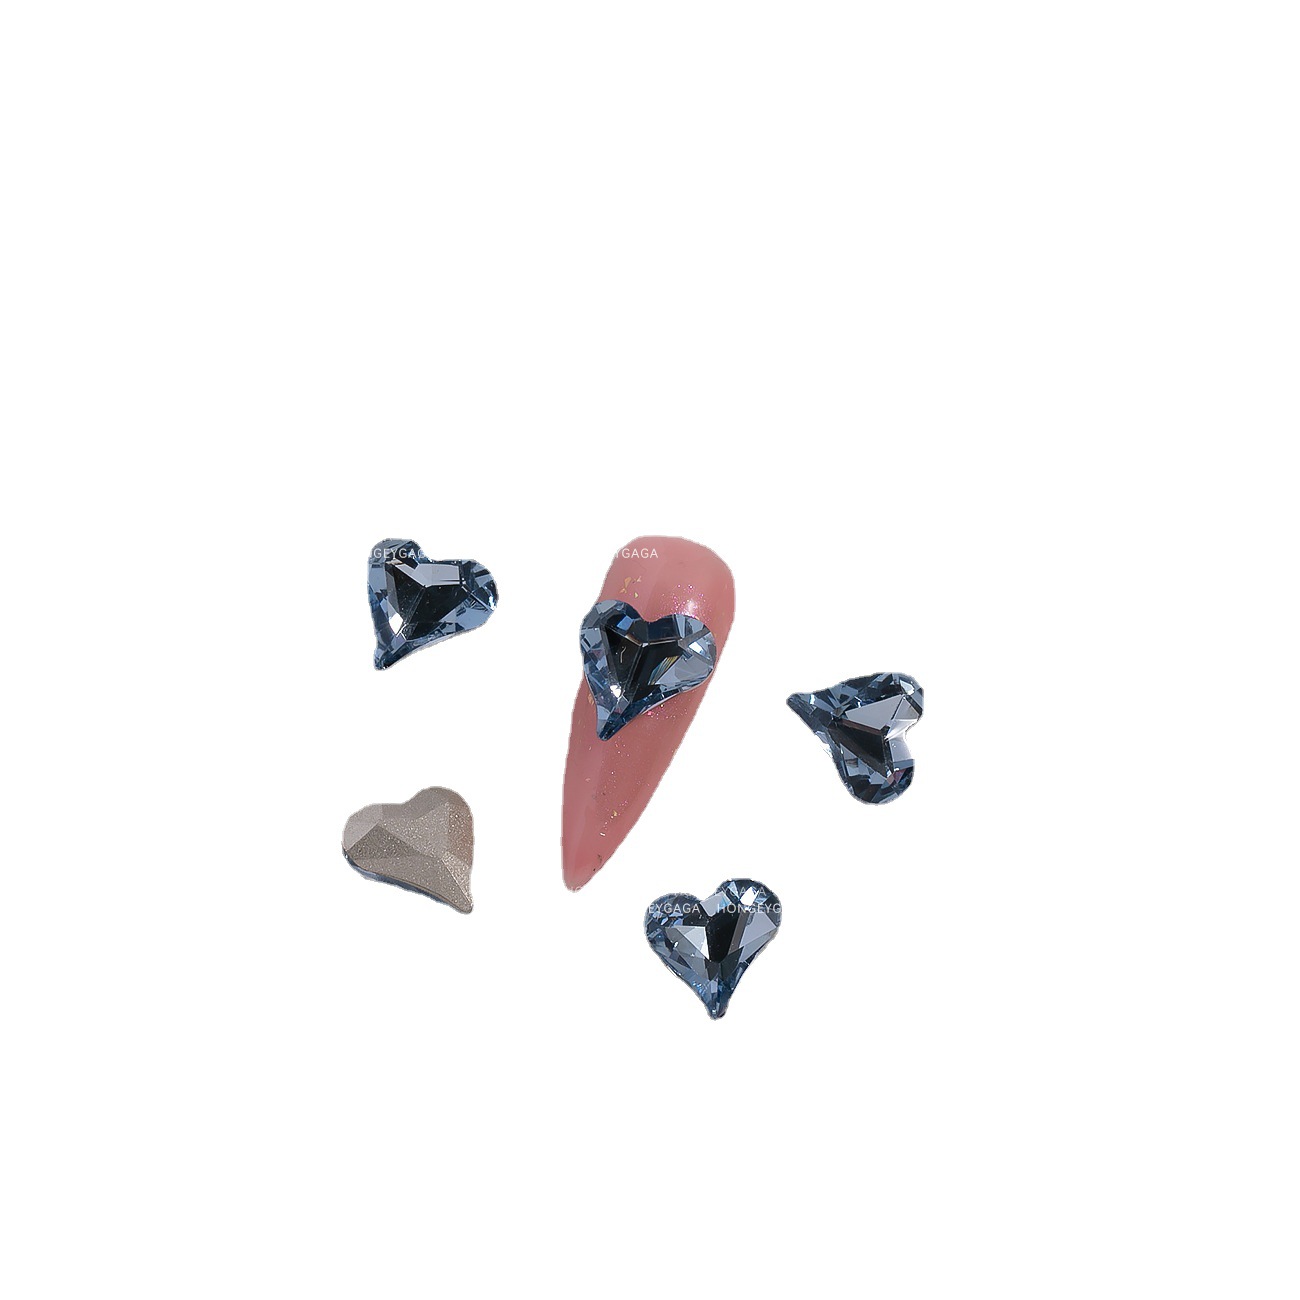 Explosive Crooked Heart Nail art diamond jewelry wholesale net red pink shaped pointy bottom diamond Love nail diamond K9 glass diamond